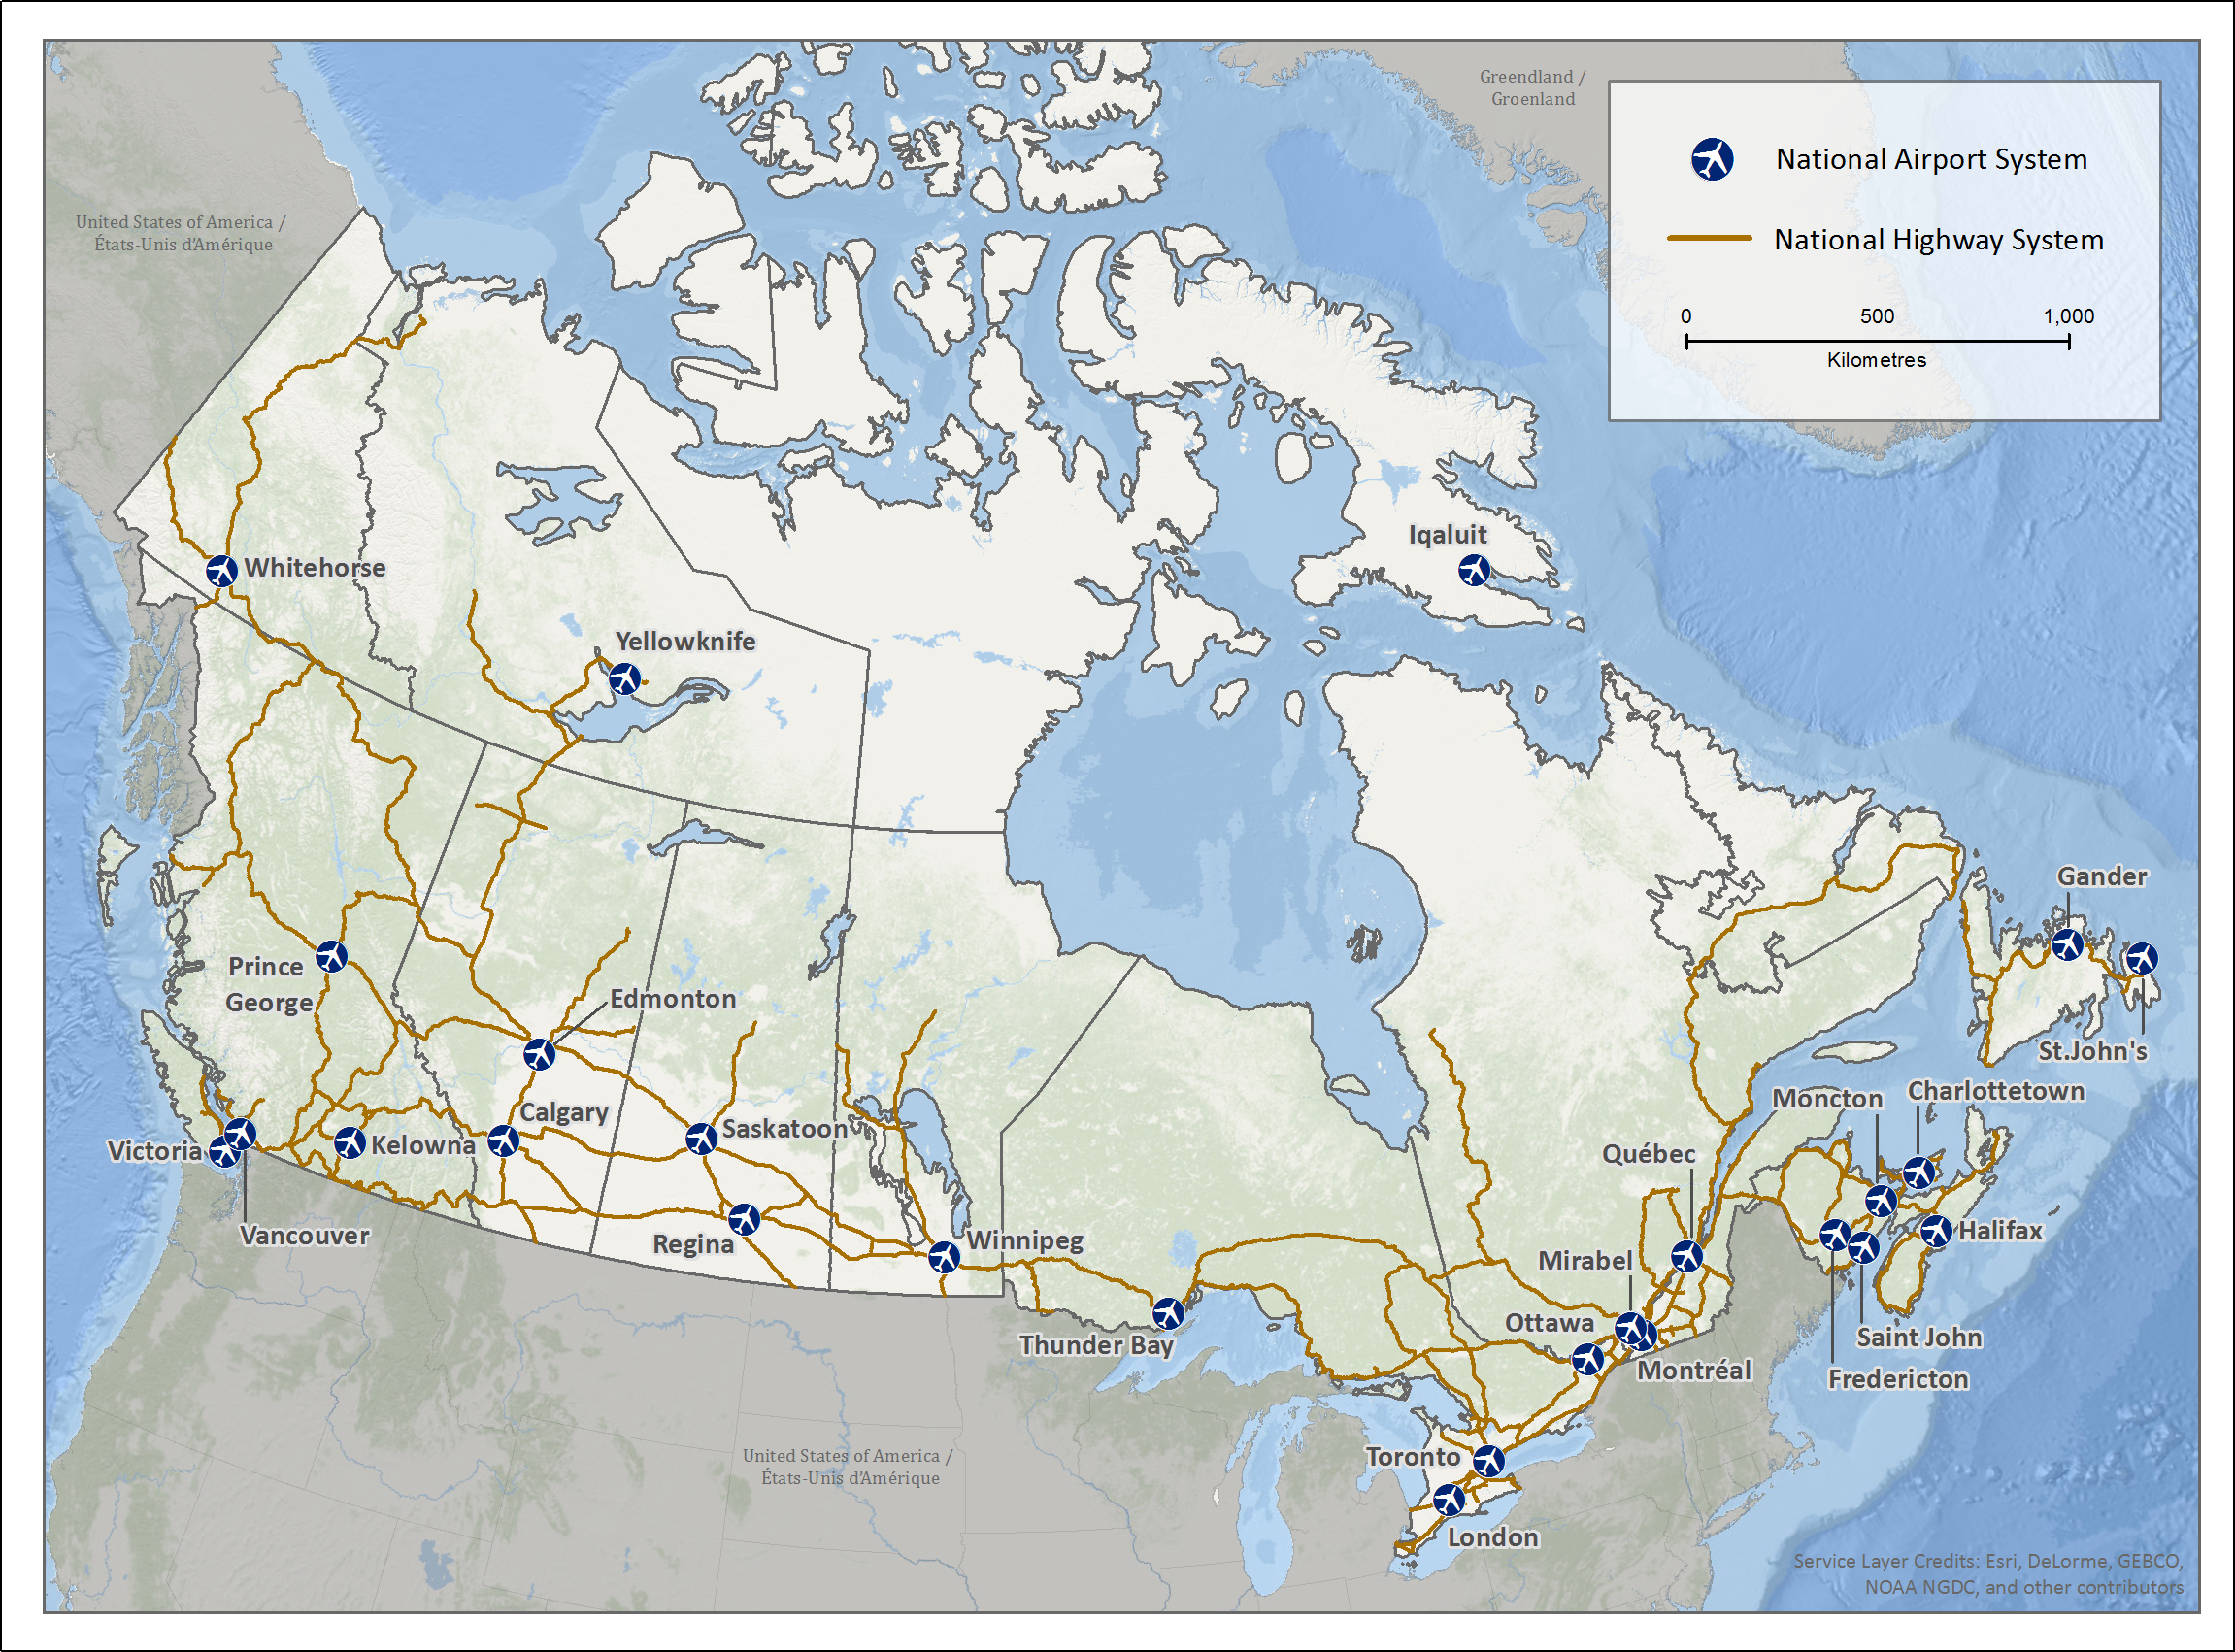 An image of Canada's highway and air infrastructure